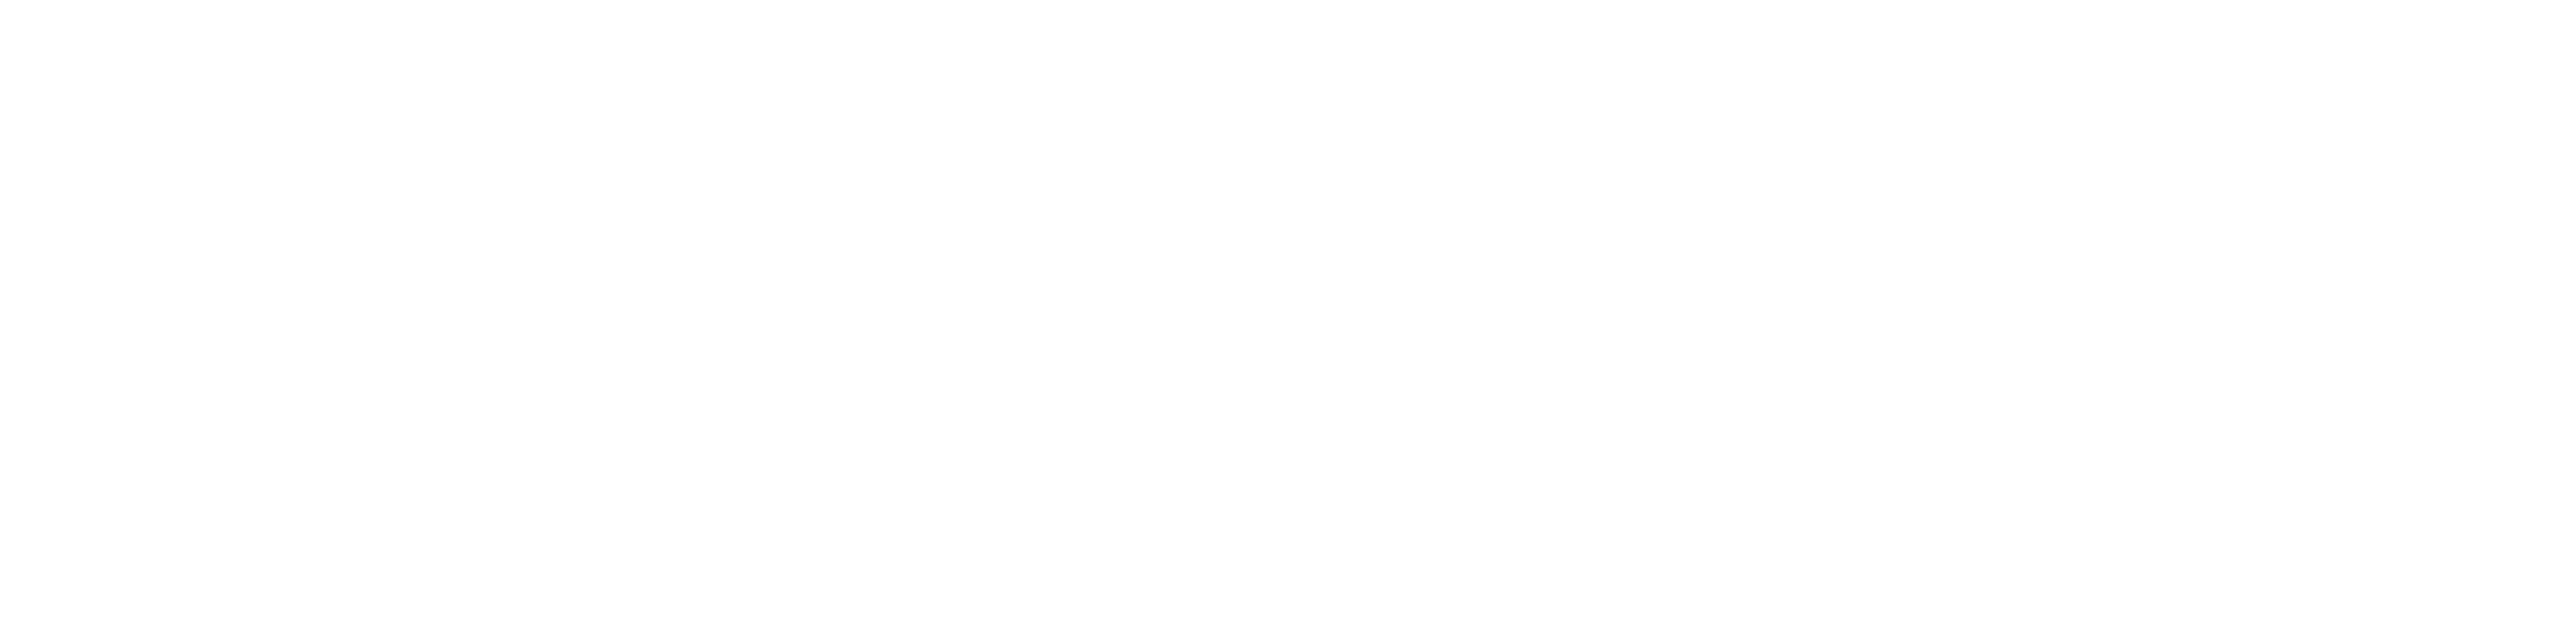 JustCars